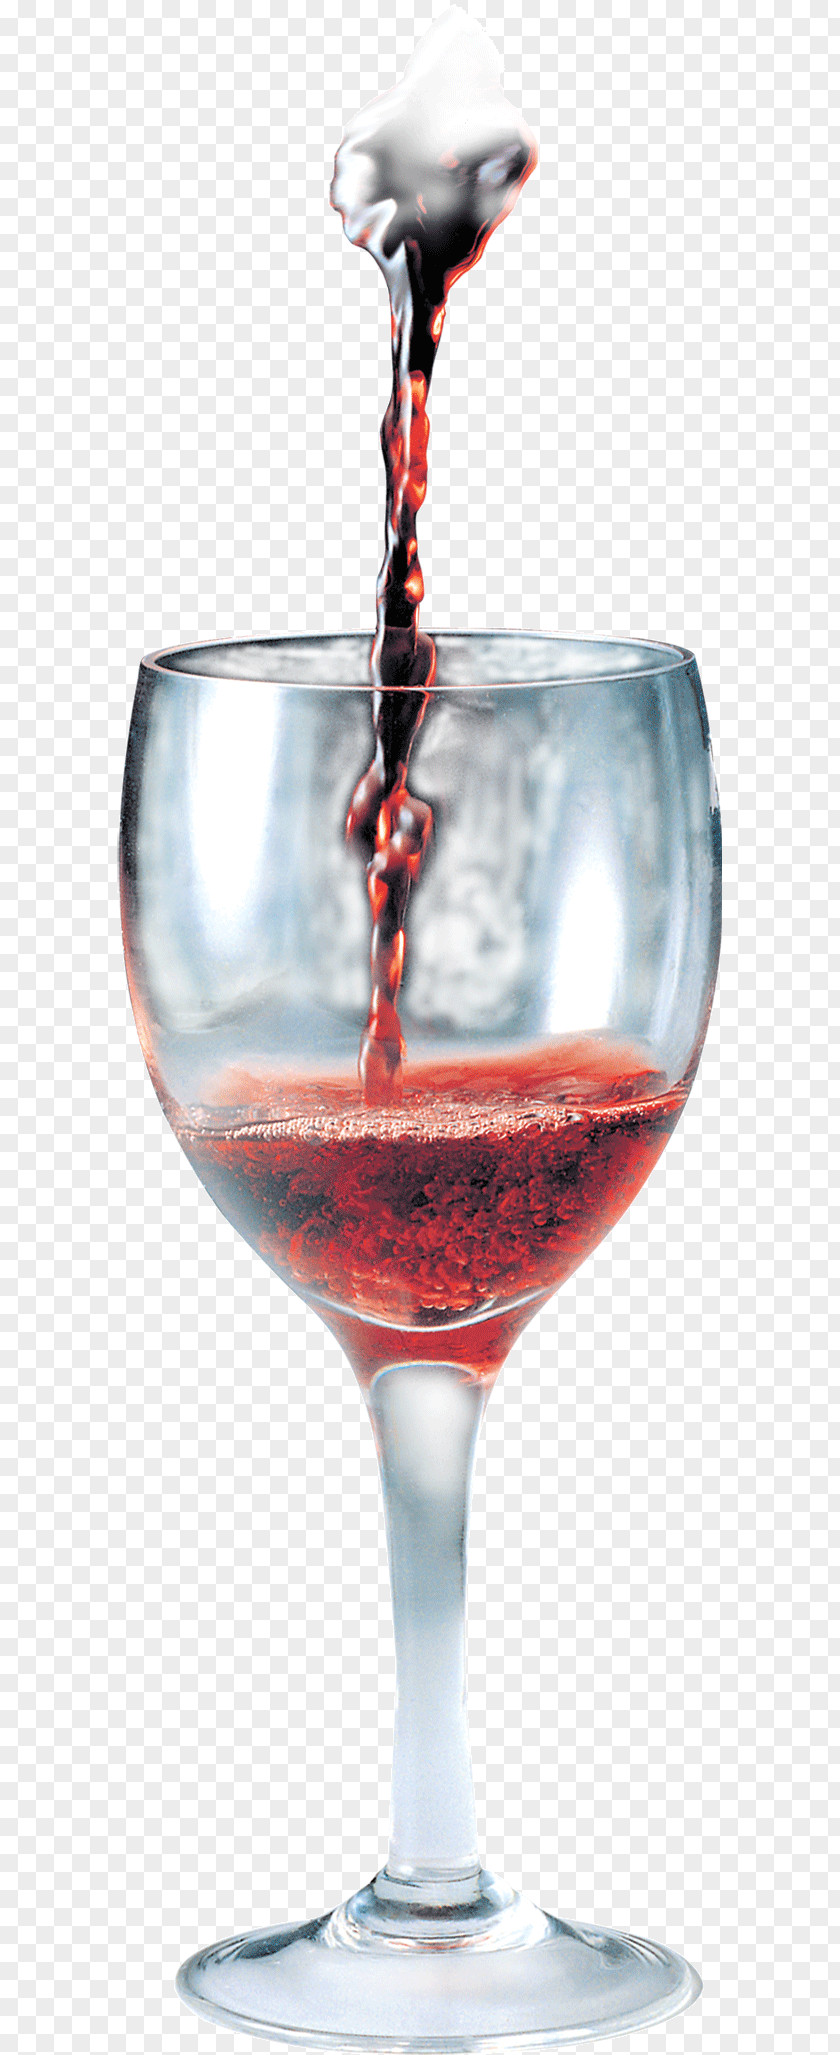 Wineglass Red Wine Juice Glass Cocktail PNG